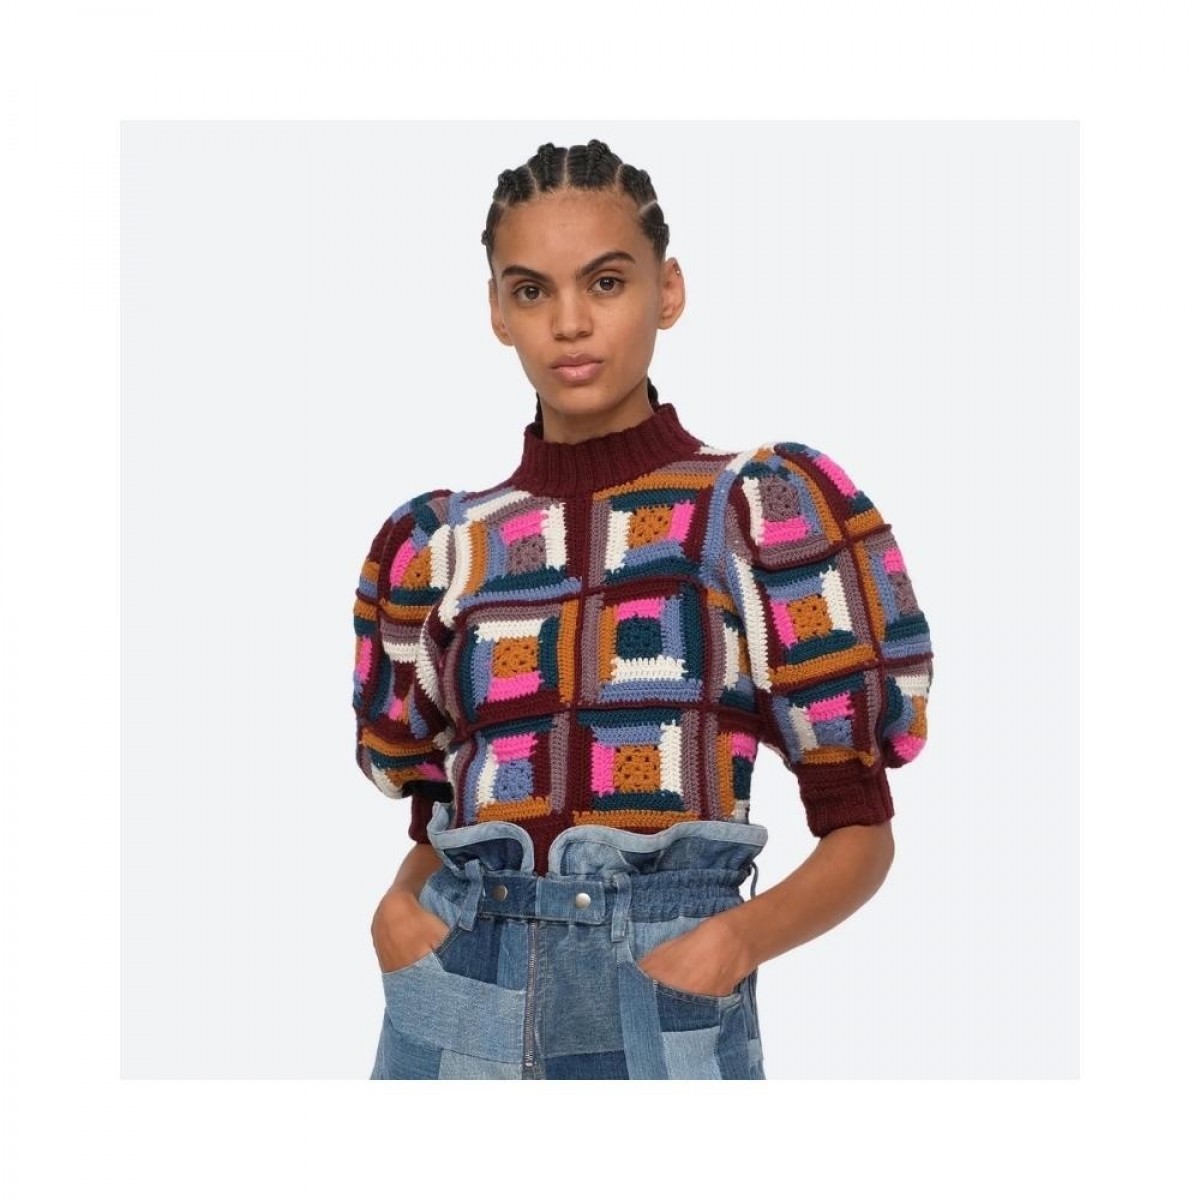 camryn s/s sweater - multi - front